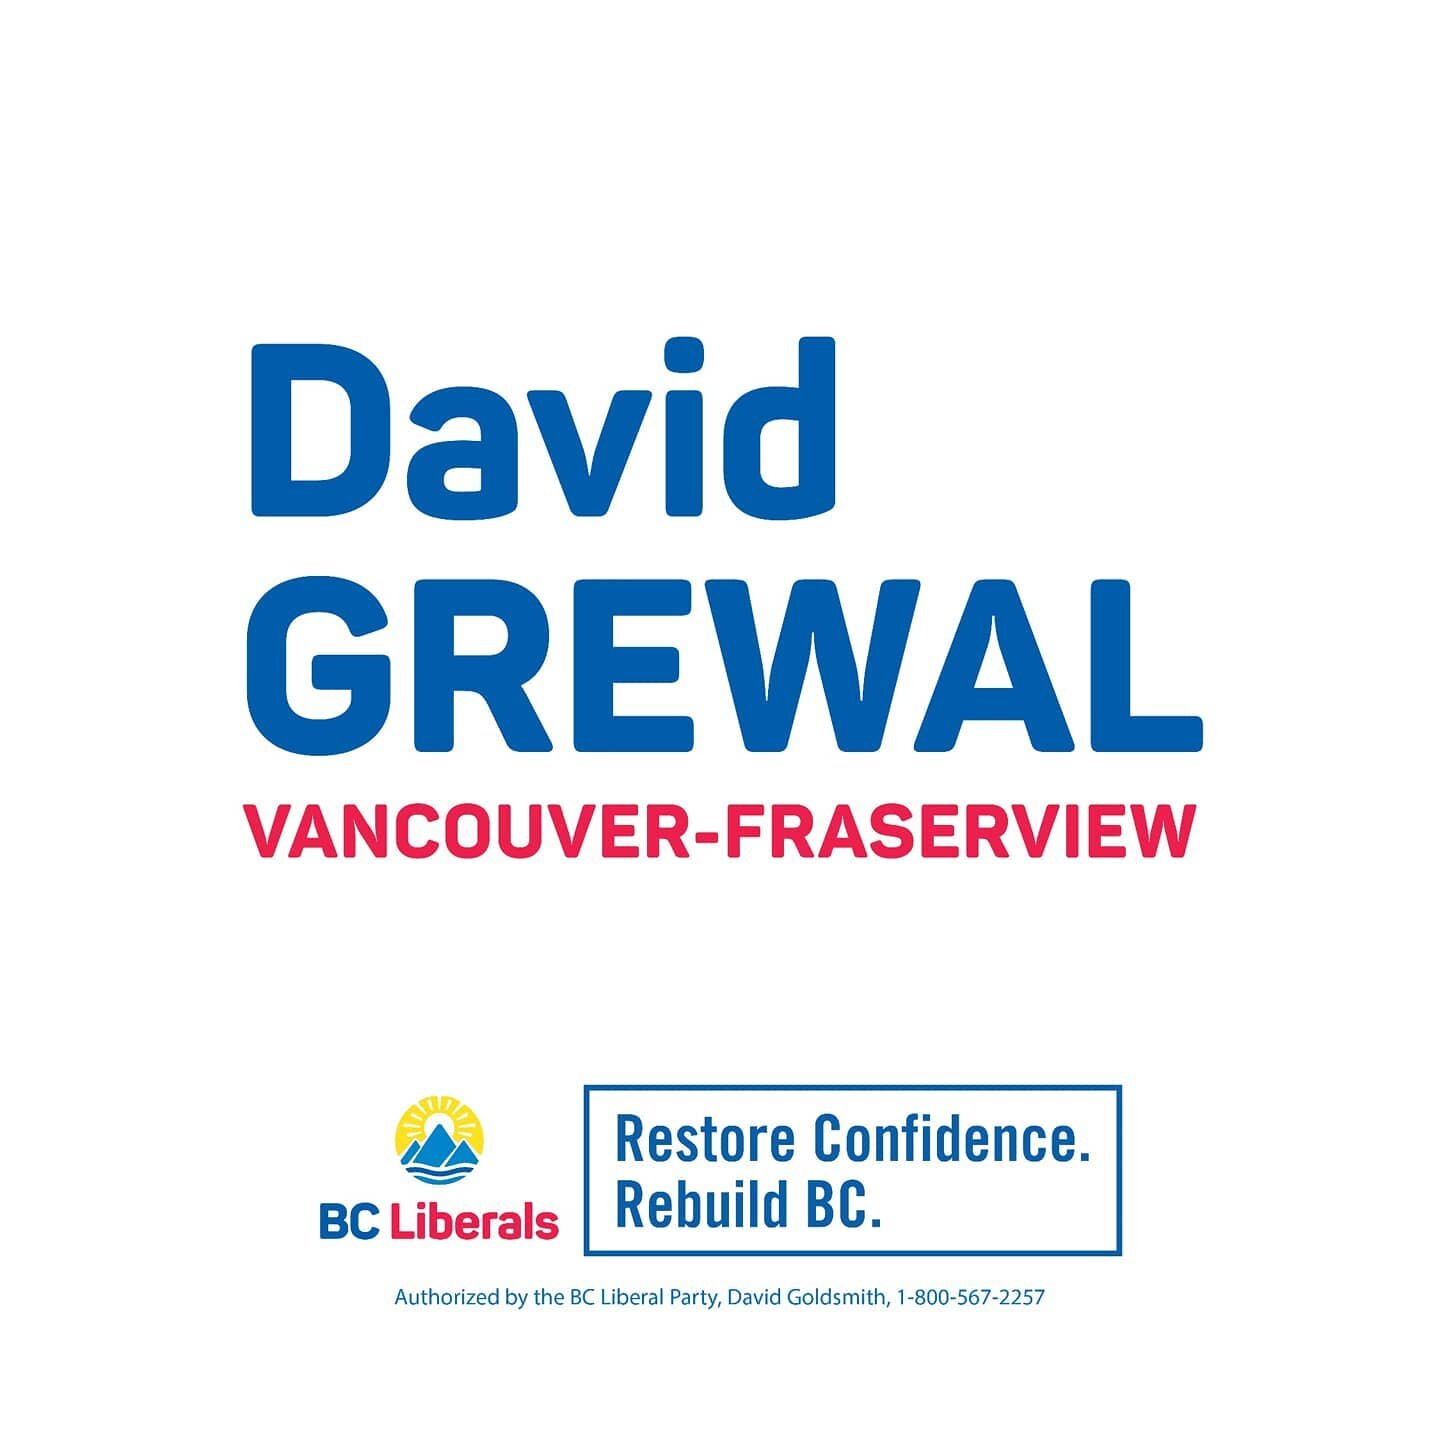 These are candidate specific graphics for @bcliberals campaigns across BC.
...
...
Thanks to @aimcreative.co for this exciting opportunity! Hopefully this isn't the last of our collaborations!
...
...
Thank you:
@david.grewal
@jamesrobertsonpomo
@lyn